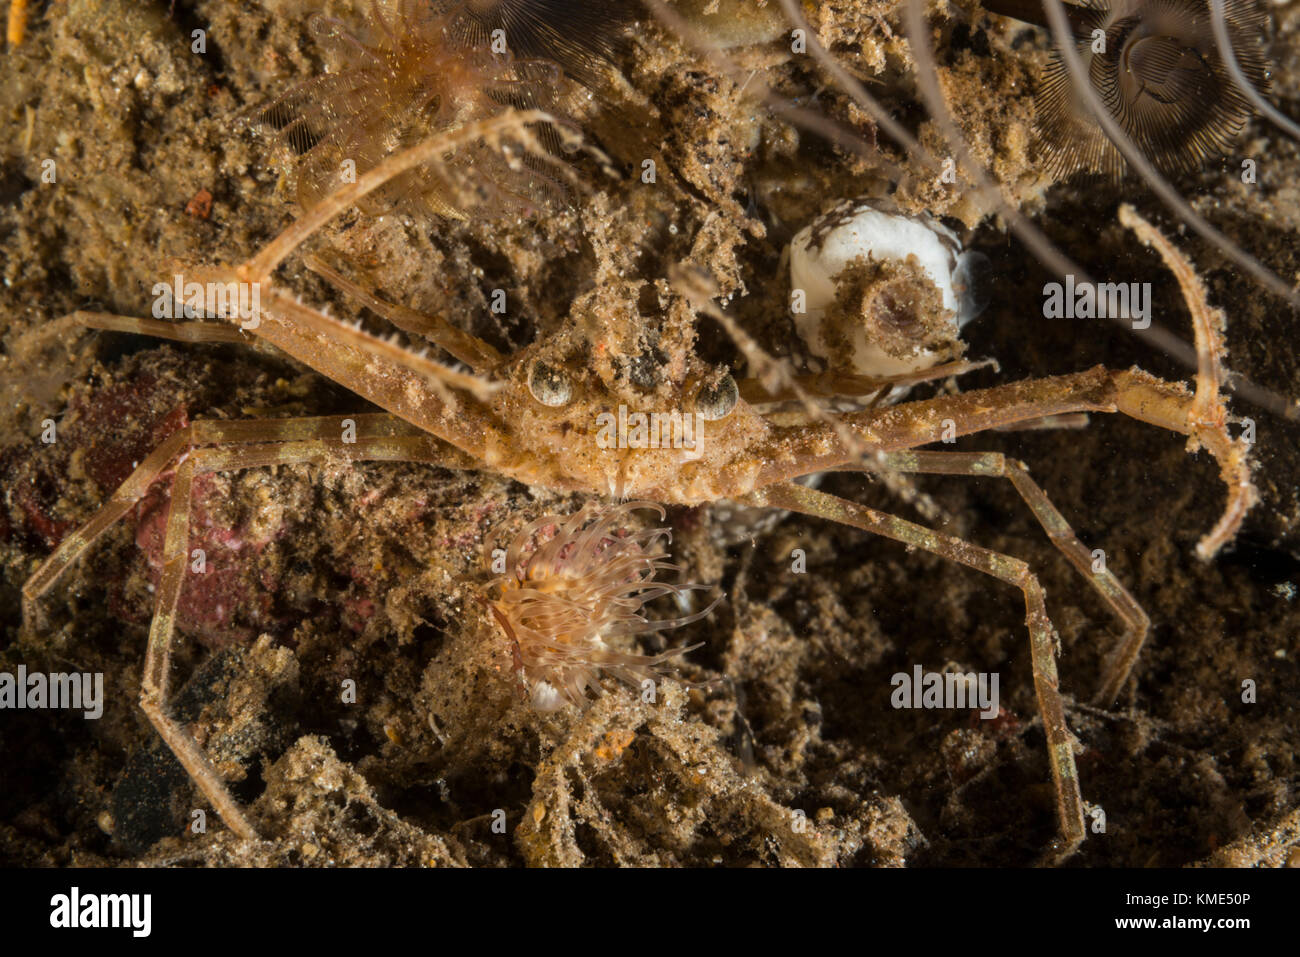 Spider crab hiding in the rubble on the sea floor Stock Photo